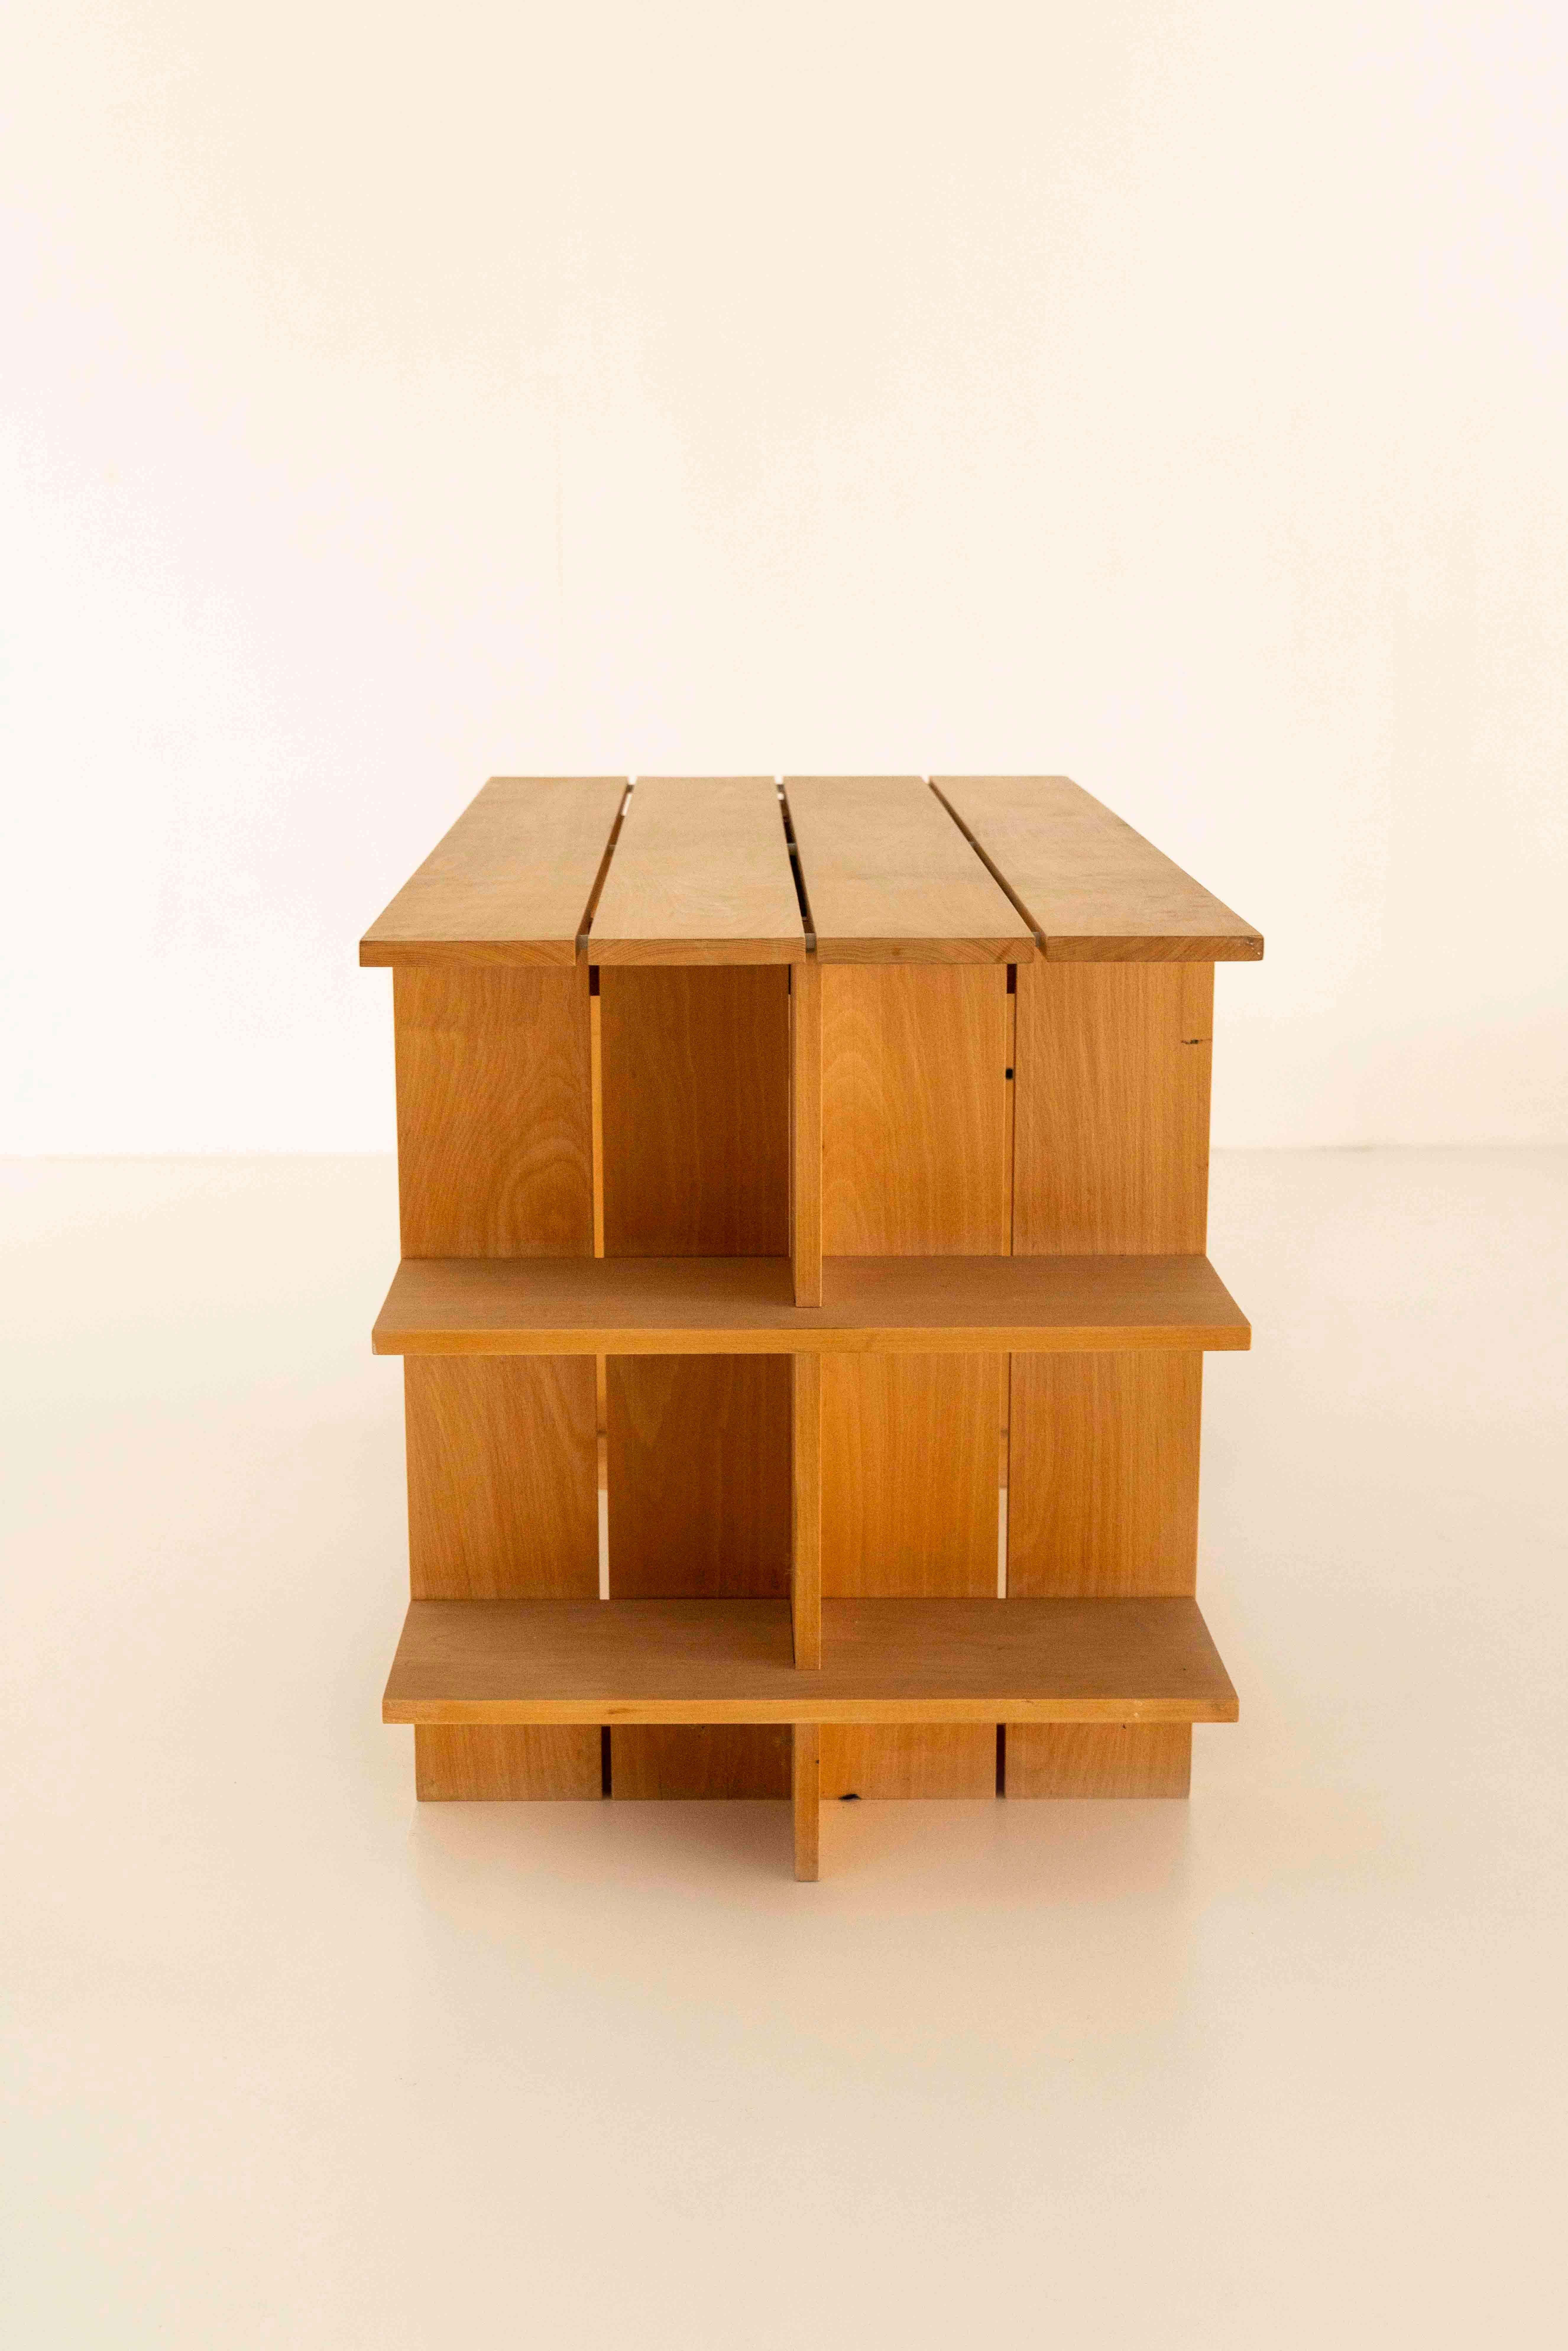 Crate Desk for Cassina by Gerrit Rietveld, Designed in 1930s, the Netherlands 1